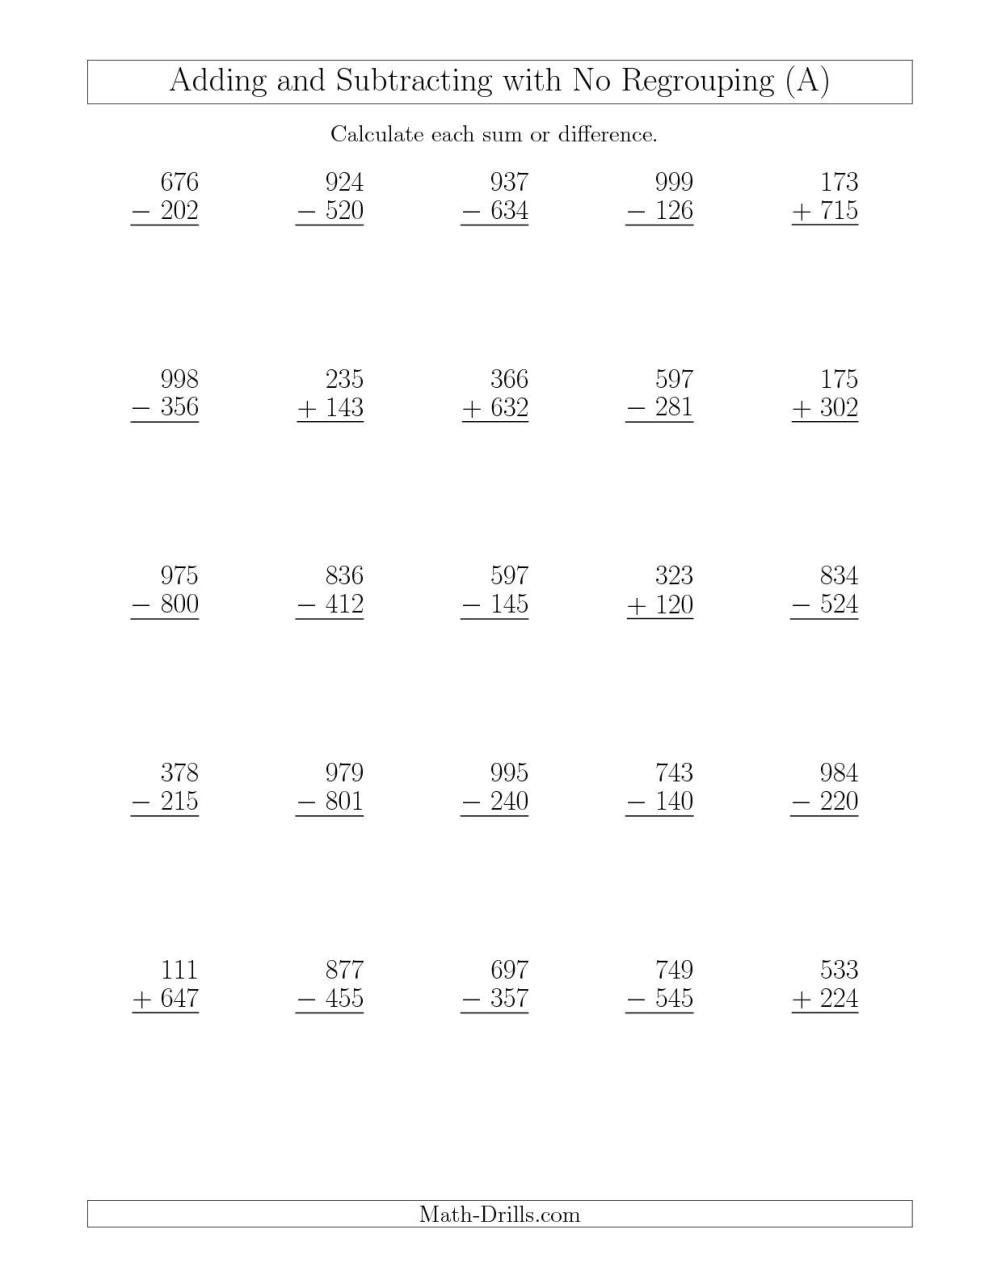 3 Digit Addition And Subtraction Worksheets